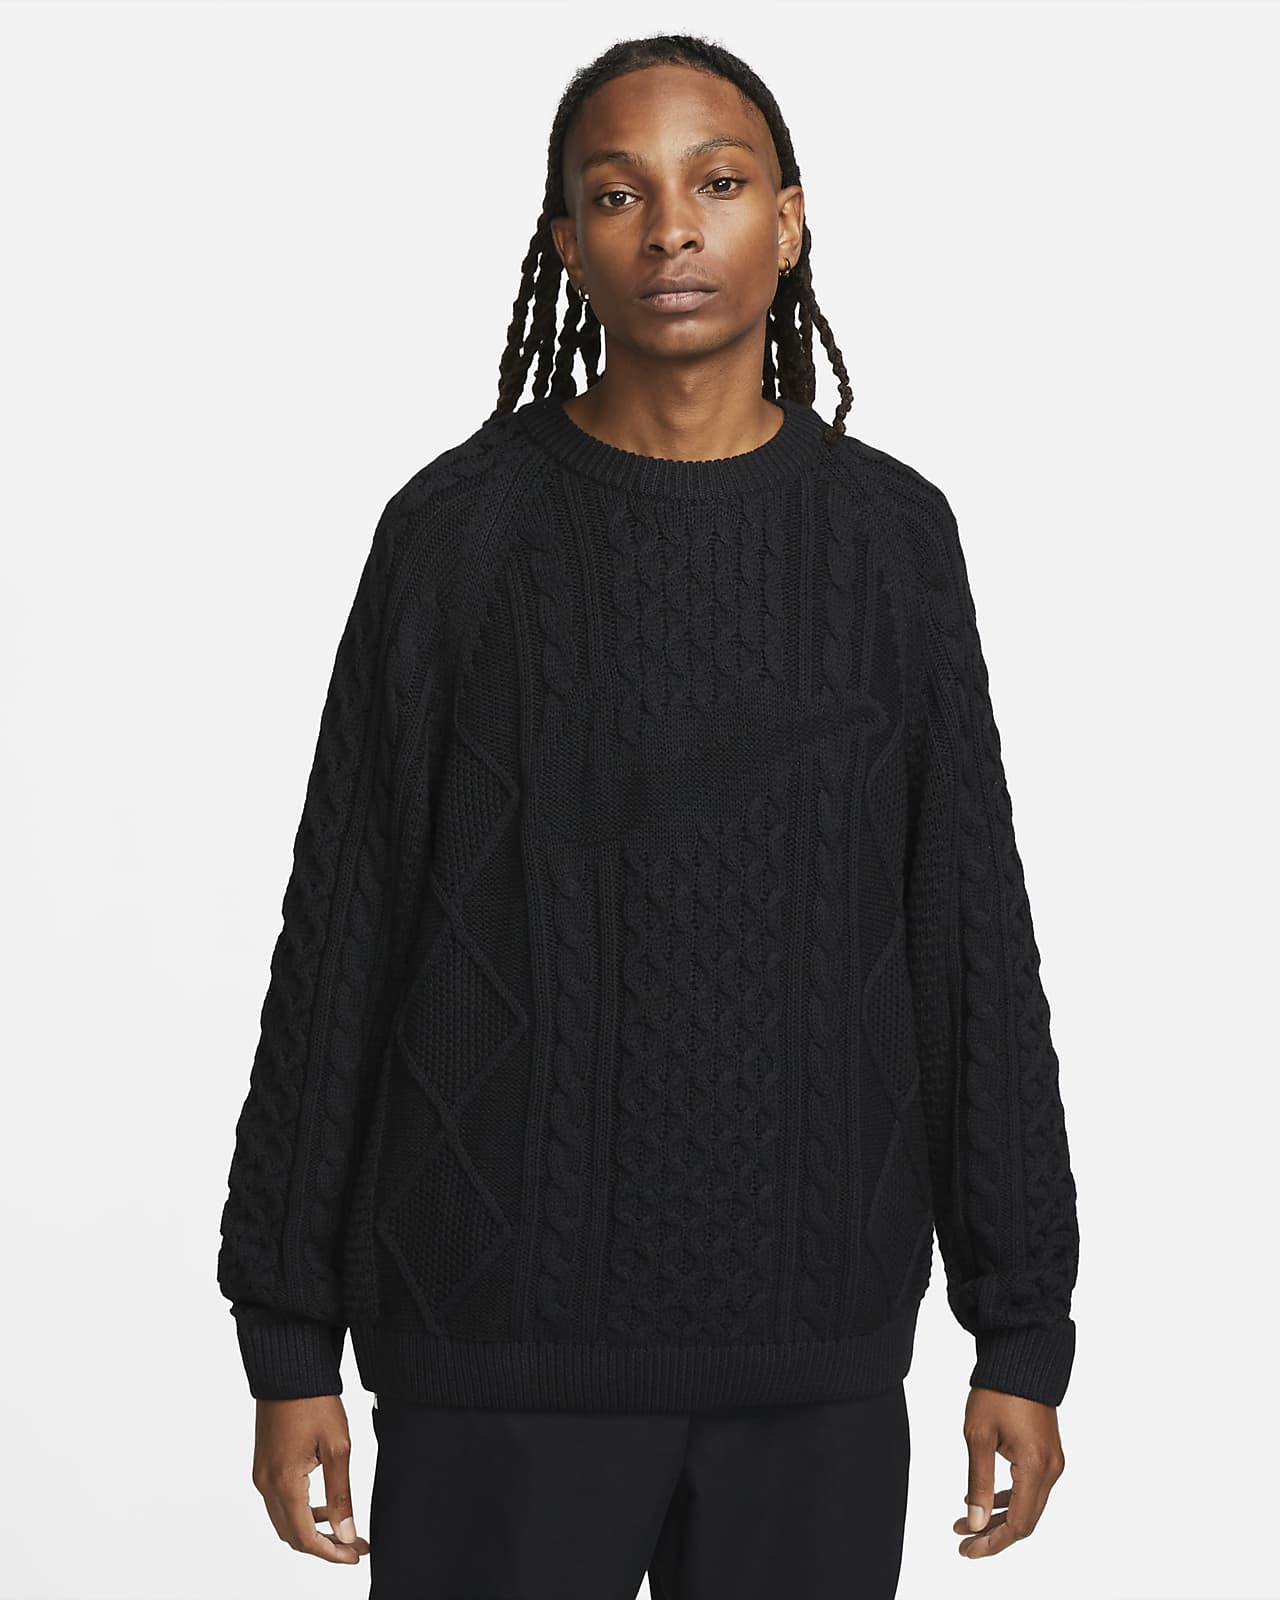 Nike Life Men's Cable Knit Sweater